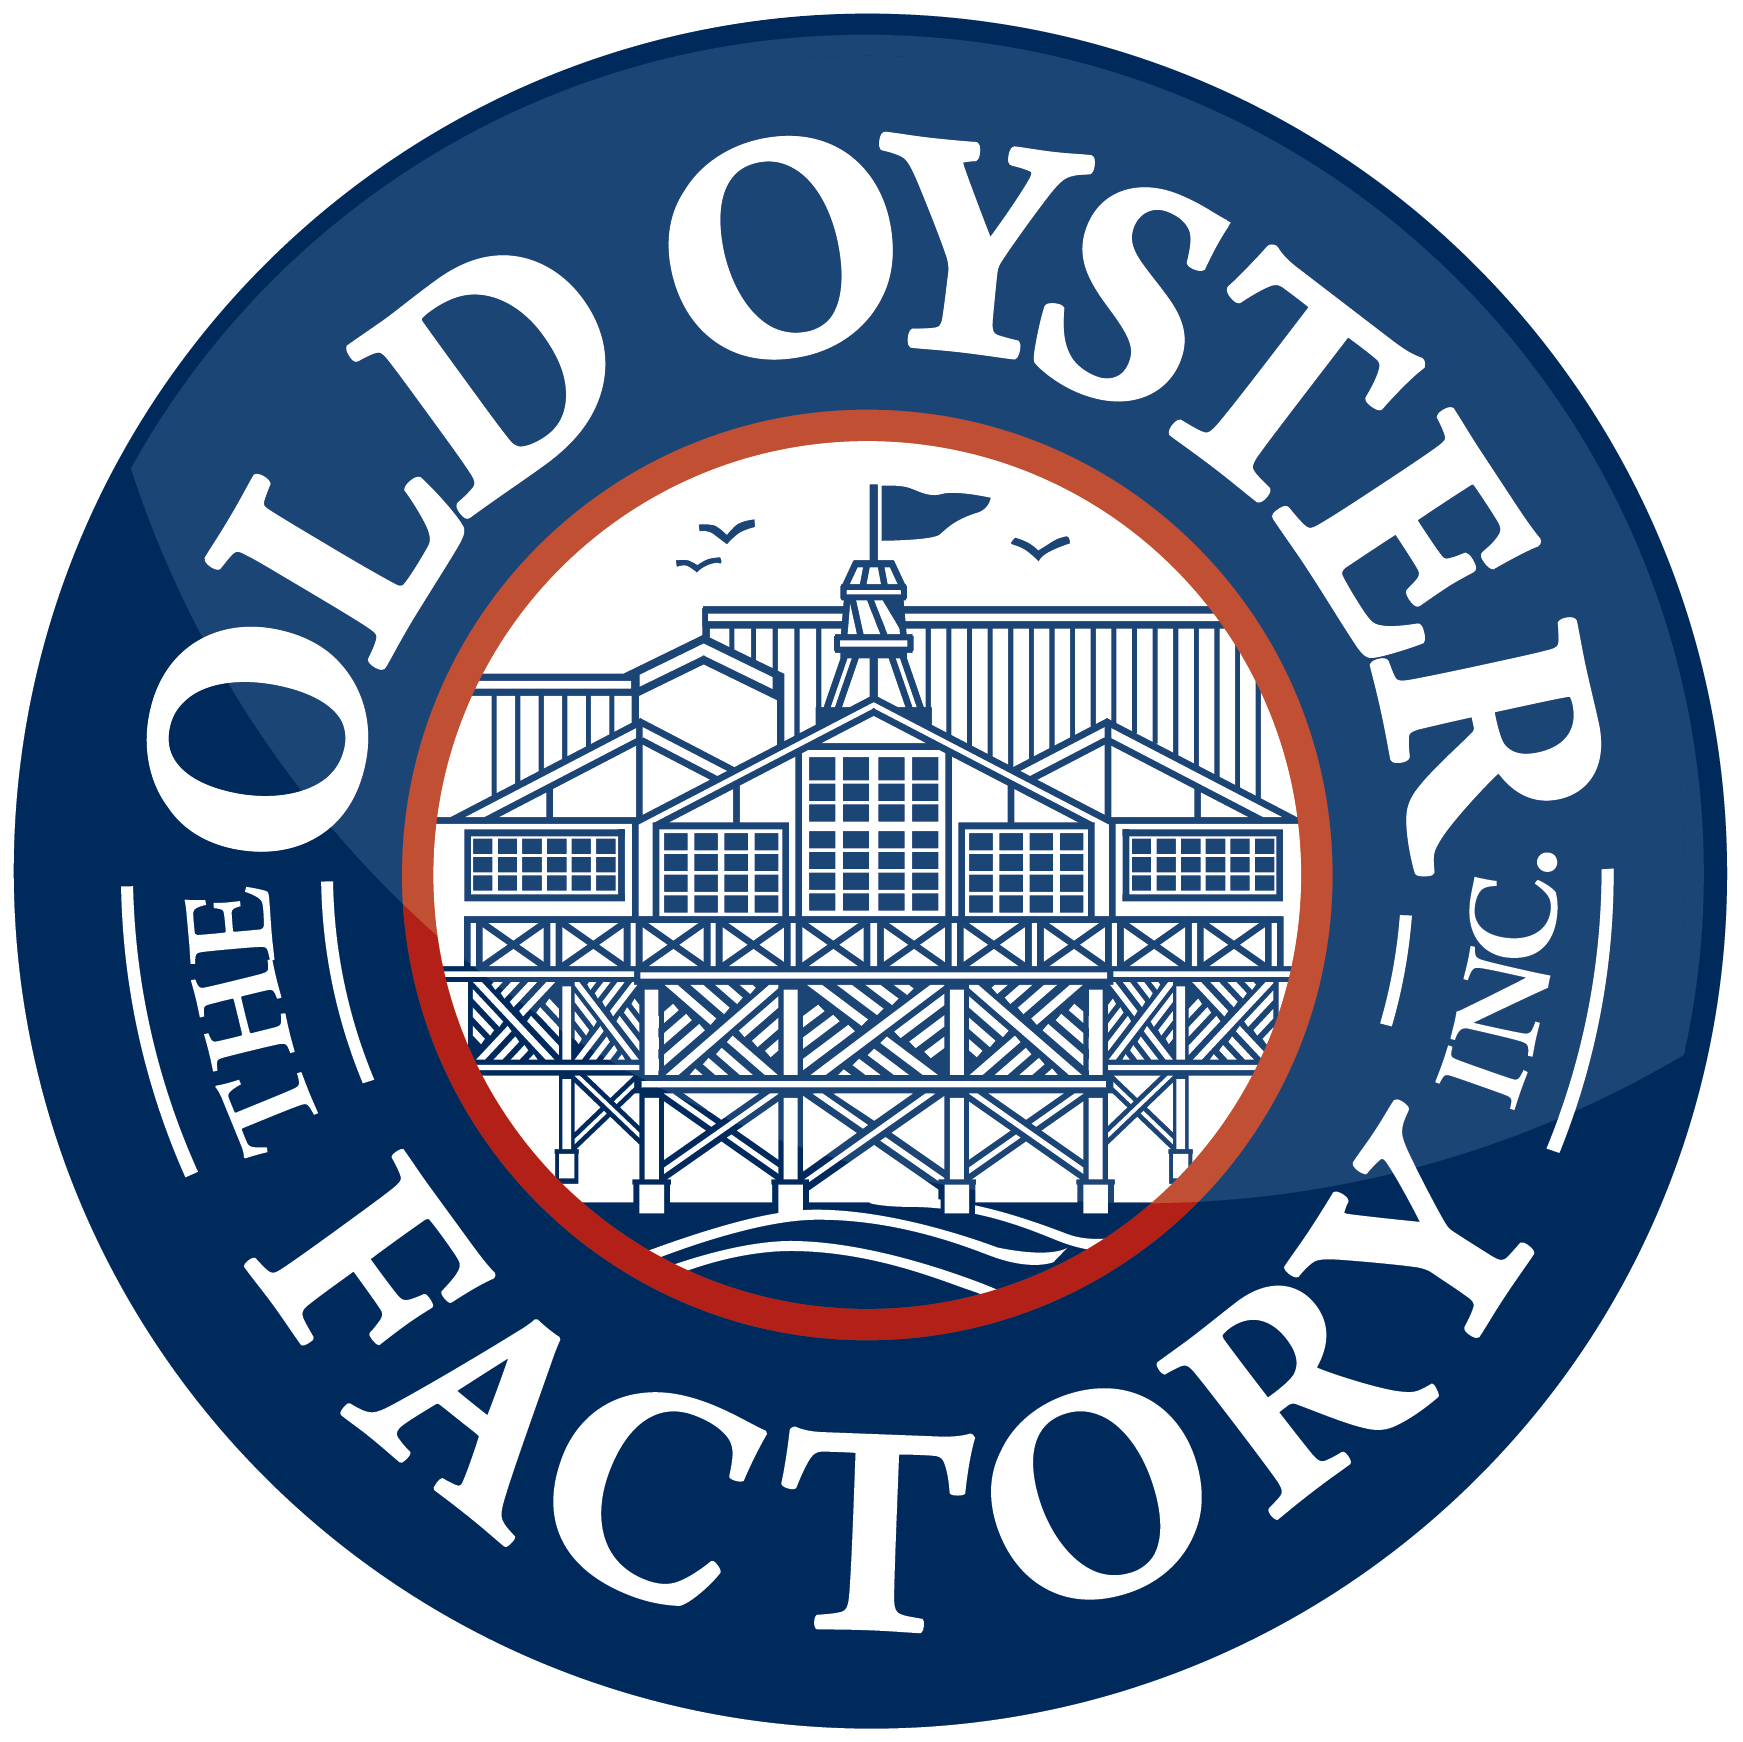 Old Oyster Factory